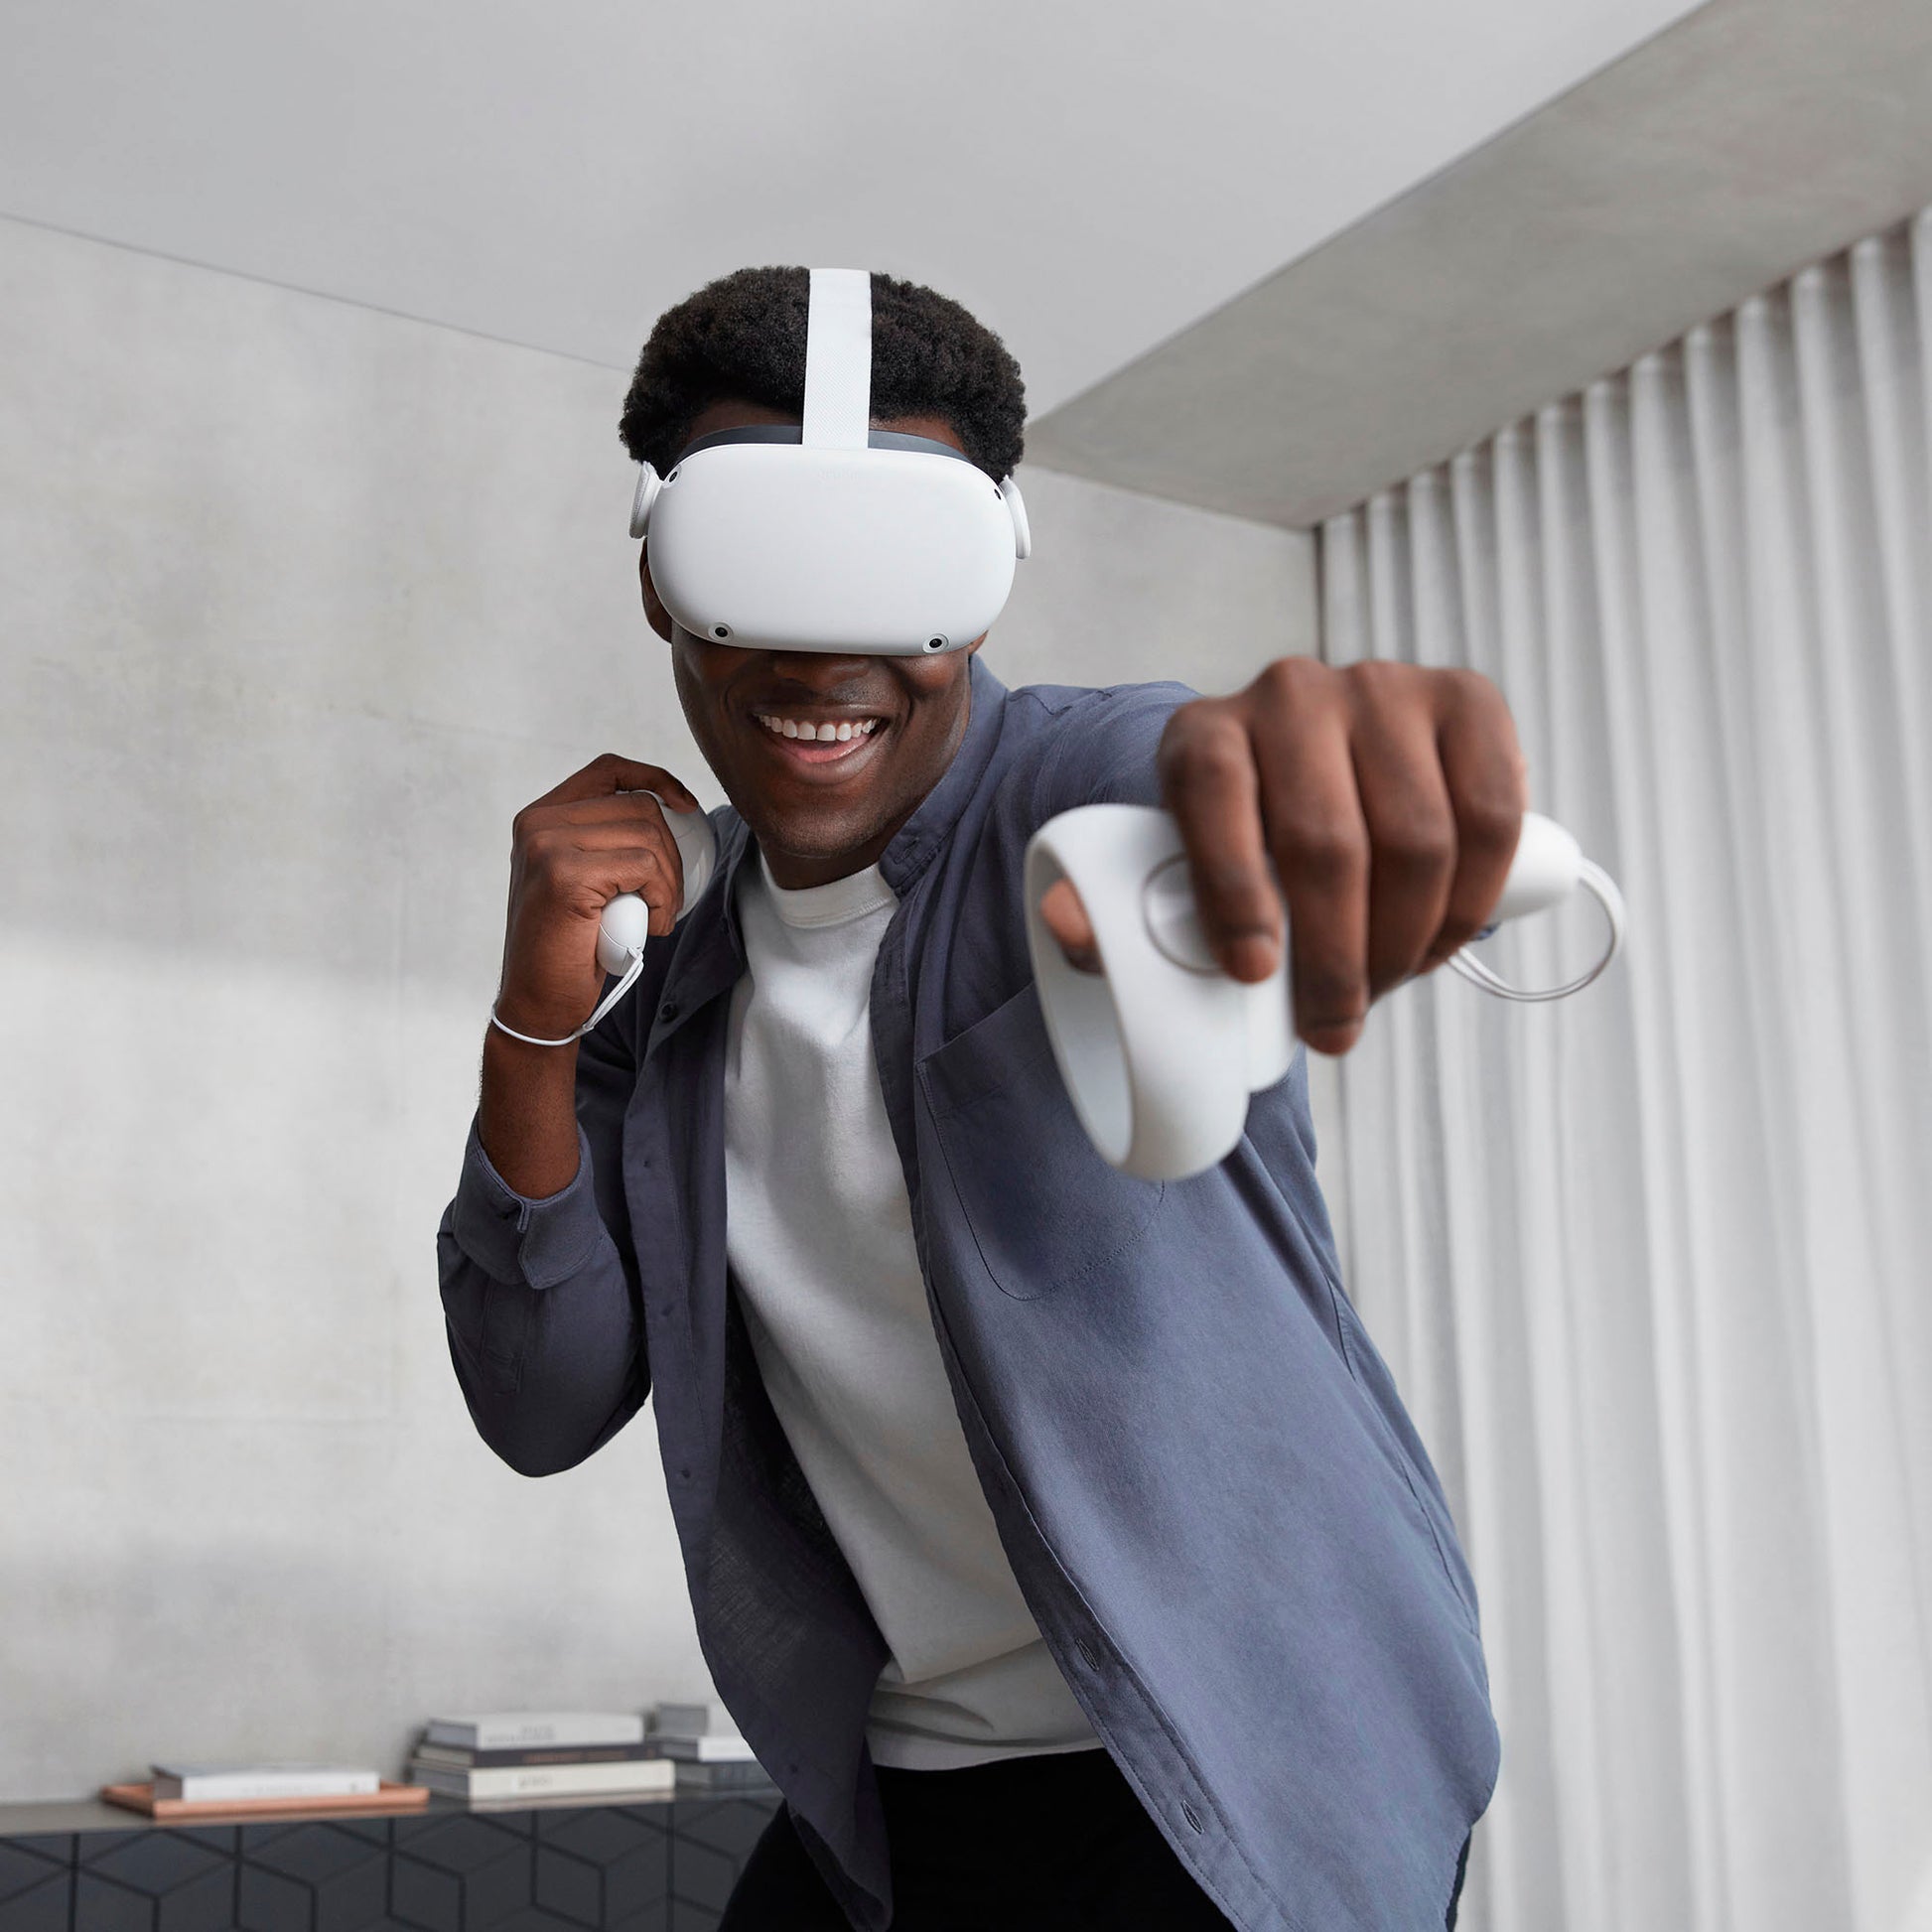 OCULUS – QUEST 2 – ADVANCED ALL-IN-ONE VIRTUAL REALITY HEADSET